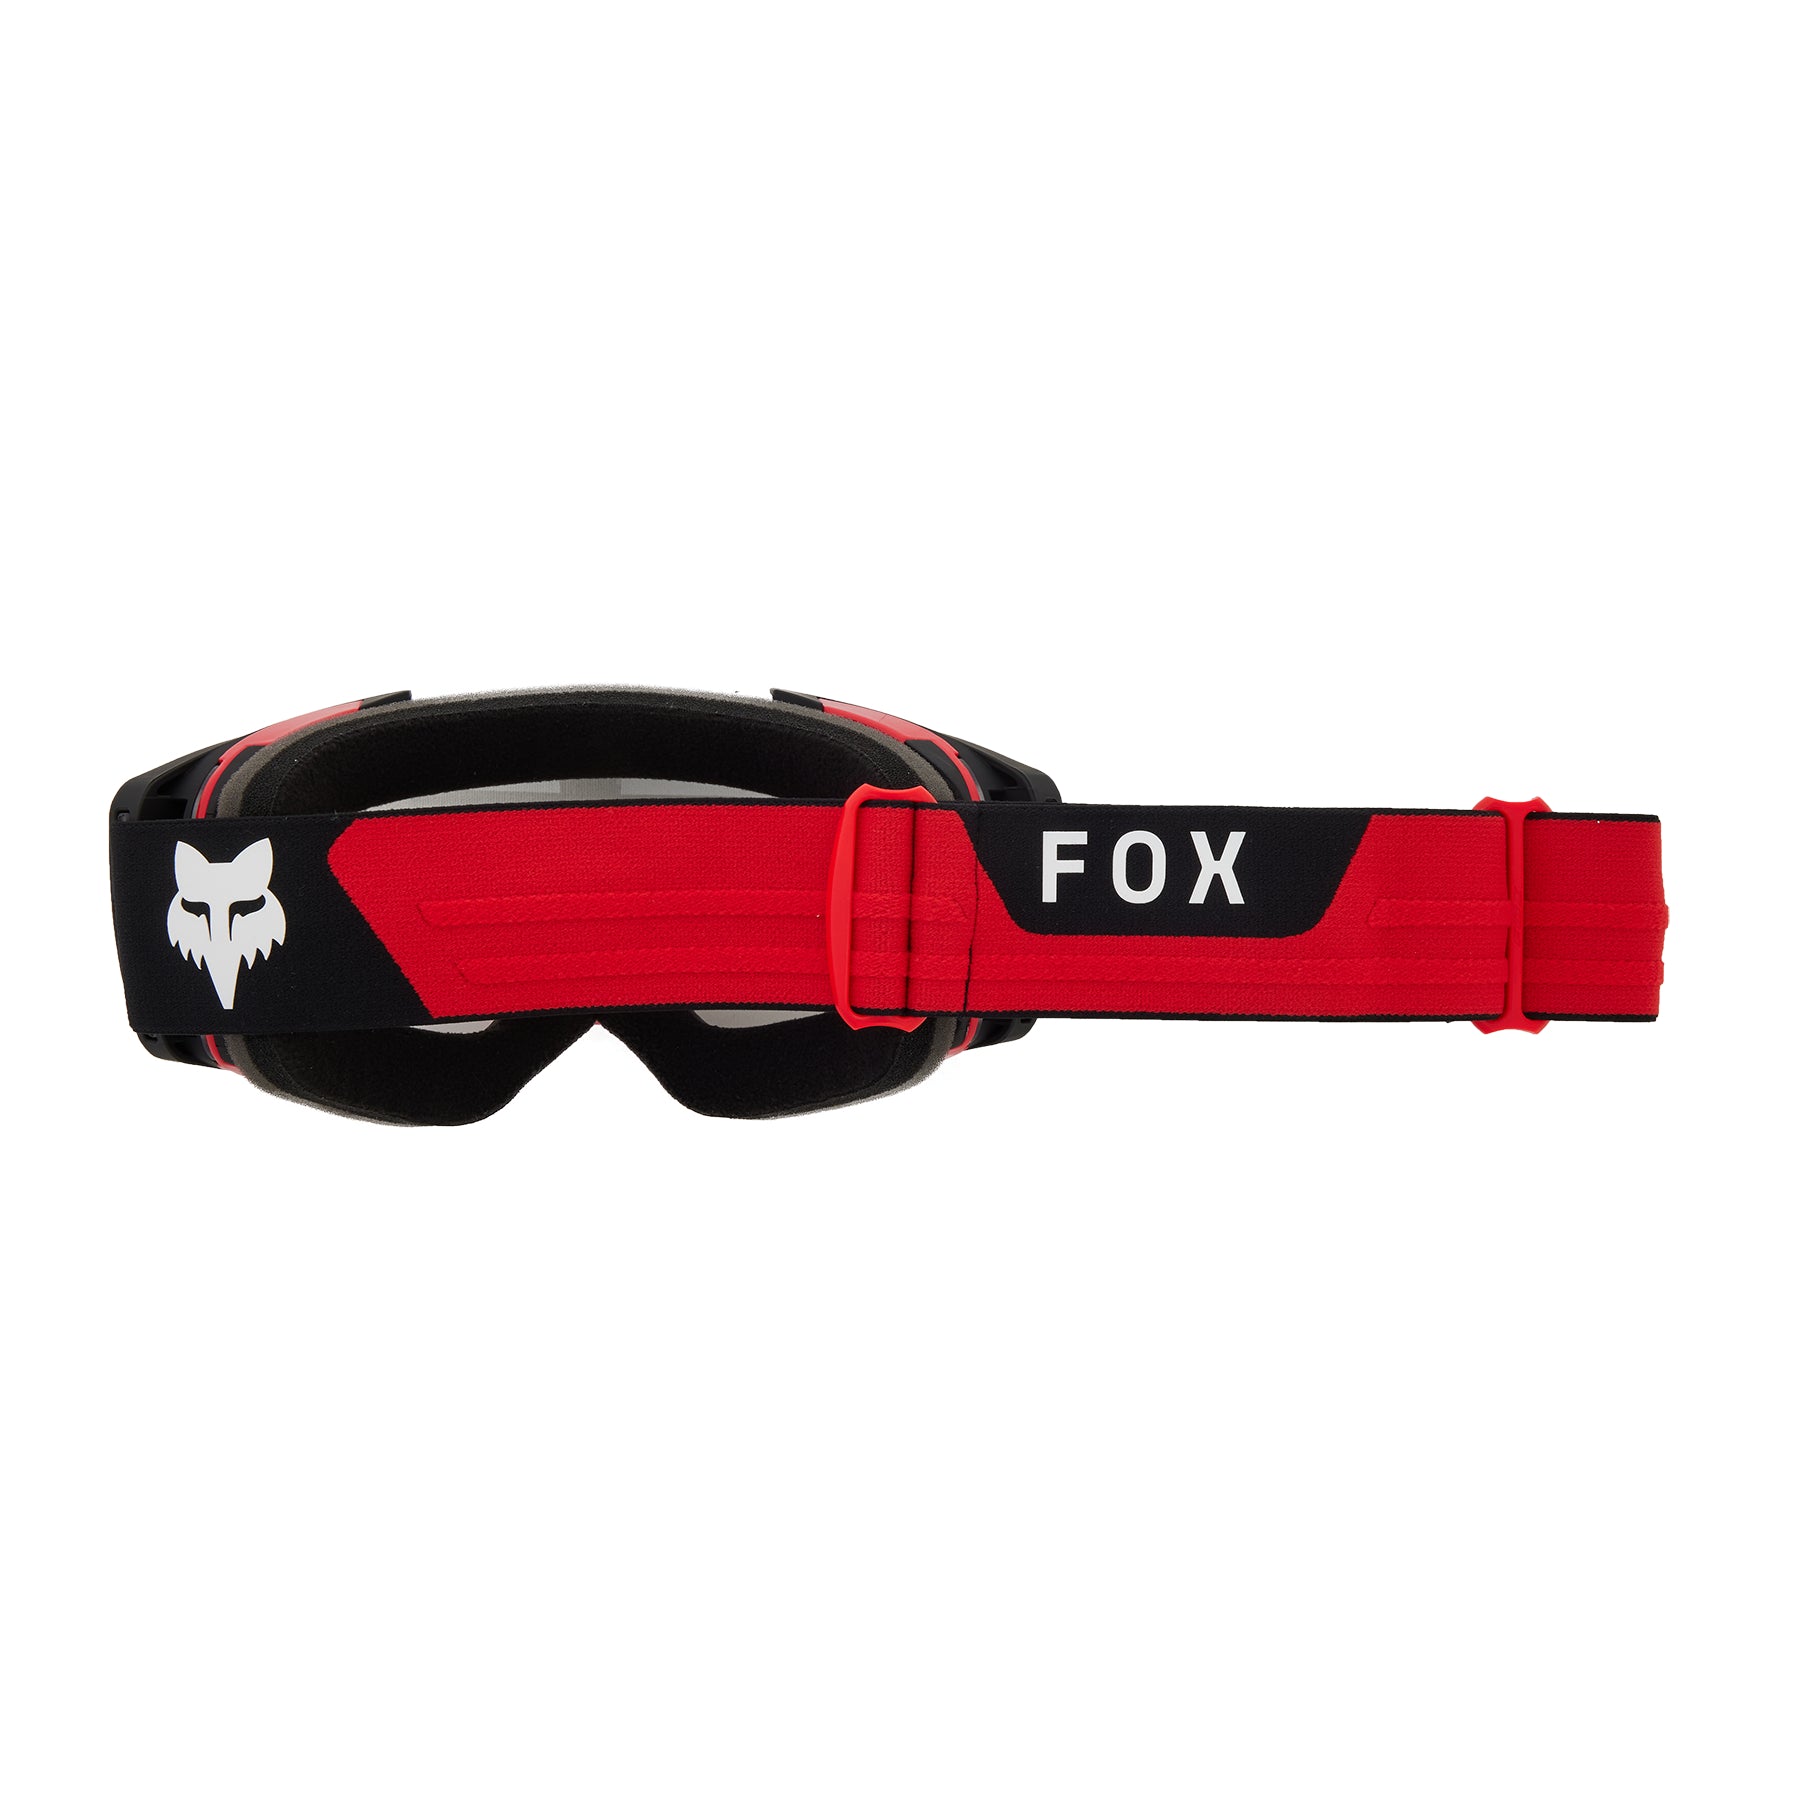 Fox Vue Core Goggles - One Size Fits Most - Flo Red - Dark Grey Lens - Image 2